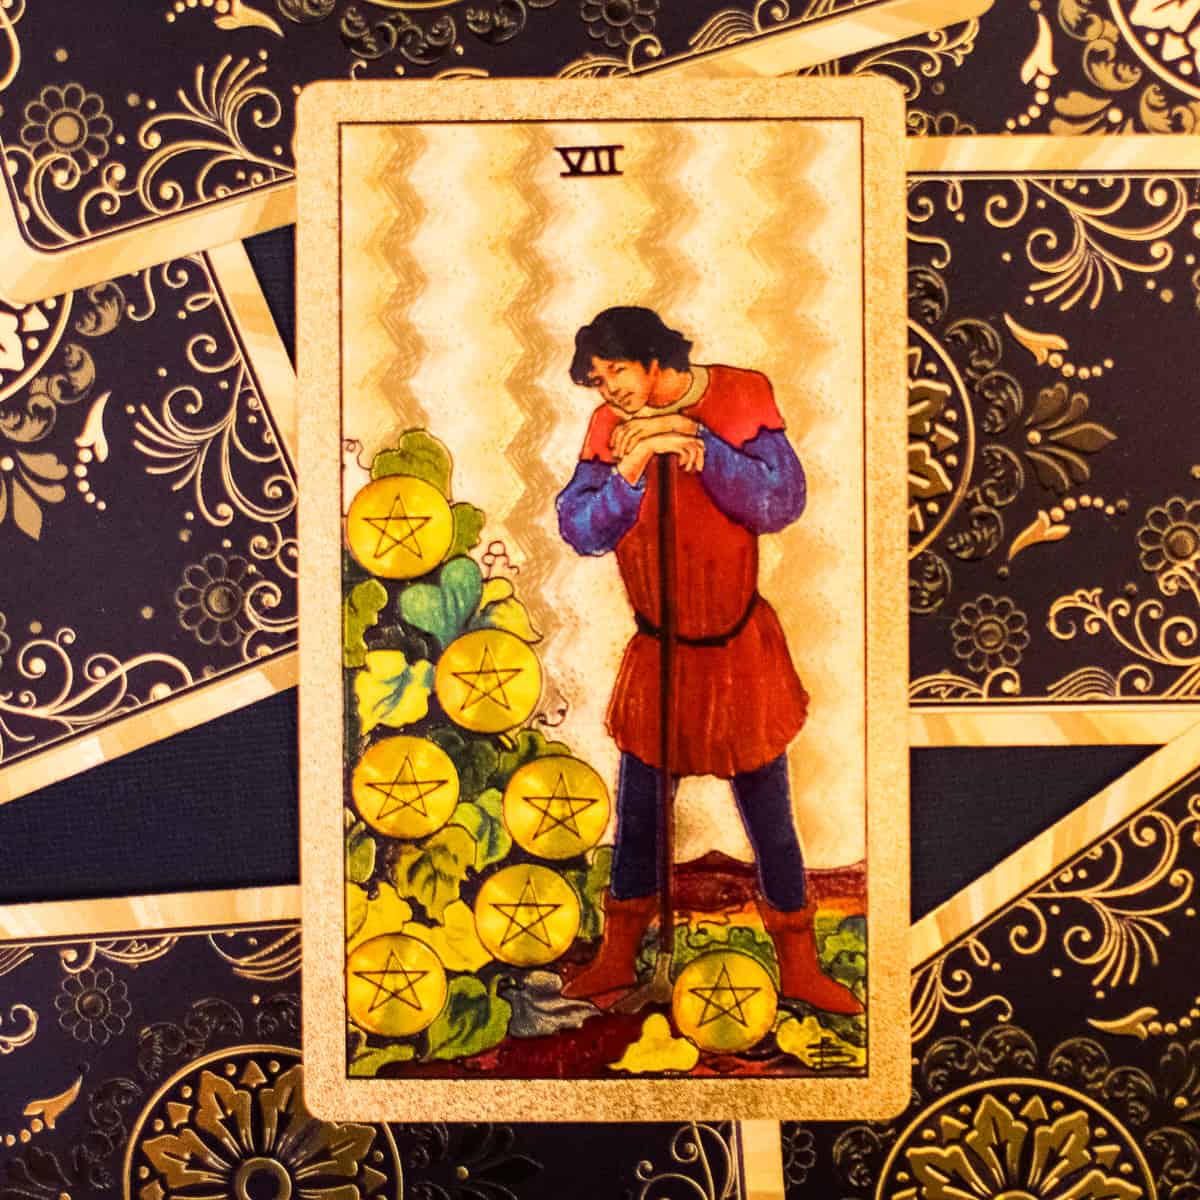 Man tending to 7 pentacles in a garden depicted on a tarot card.